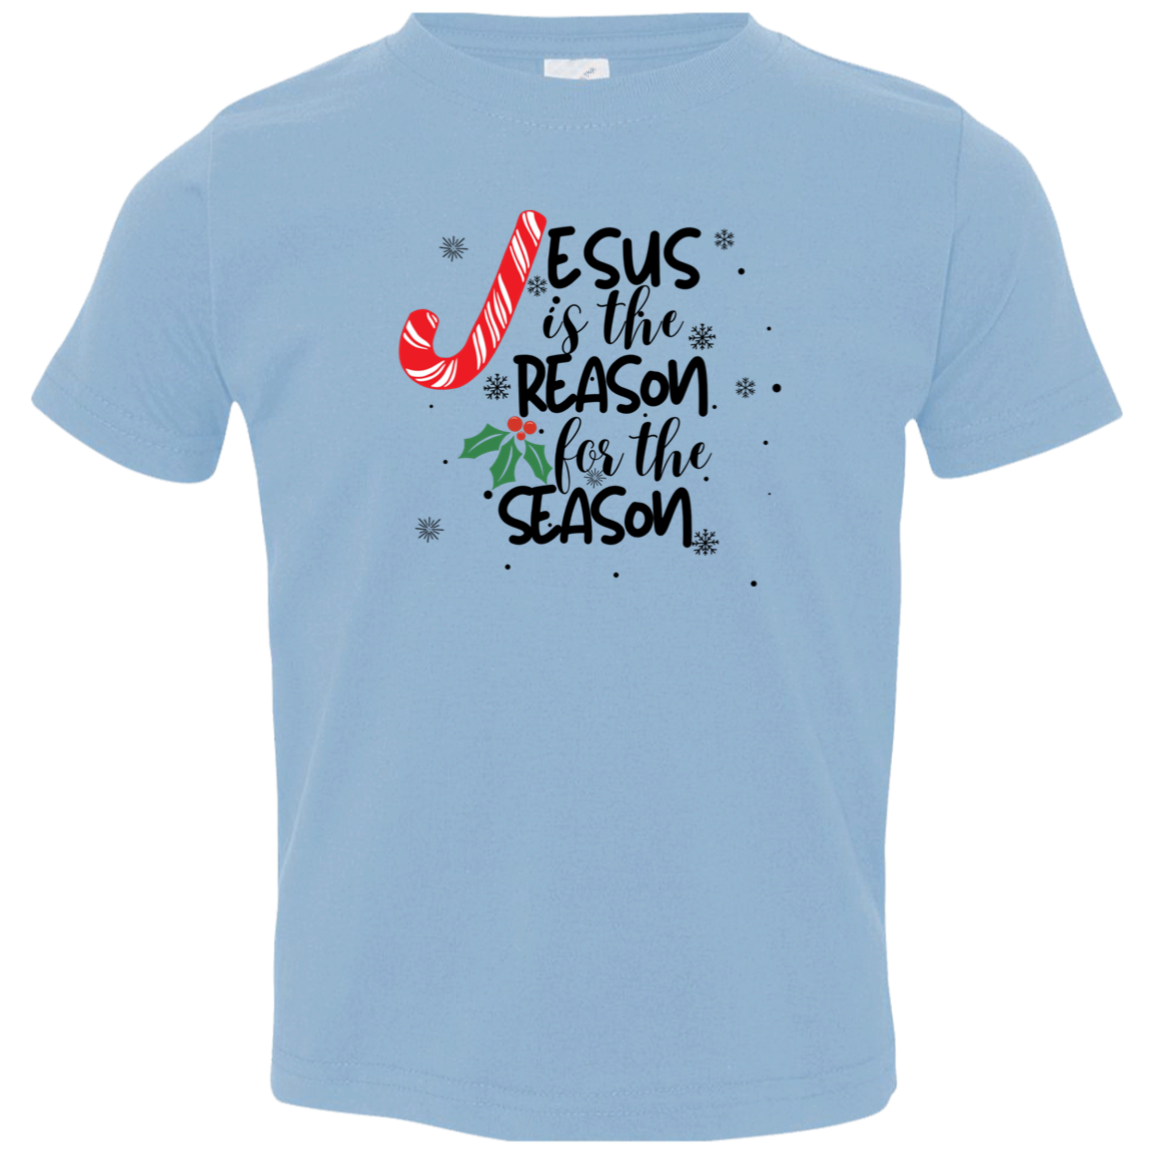 Jesus is the Reason Candy Toddler T - Shirt